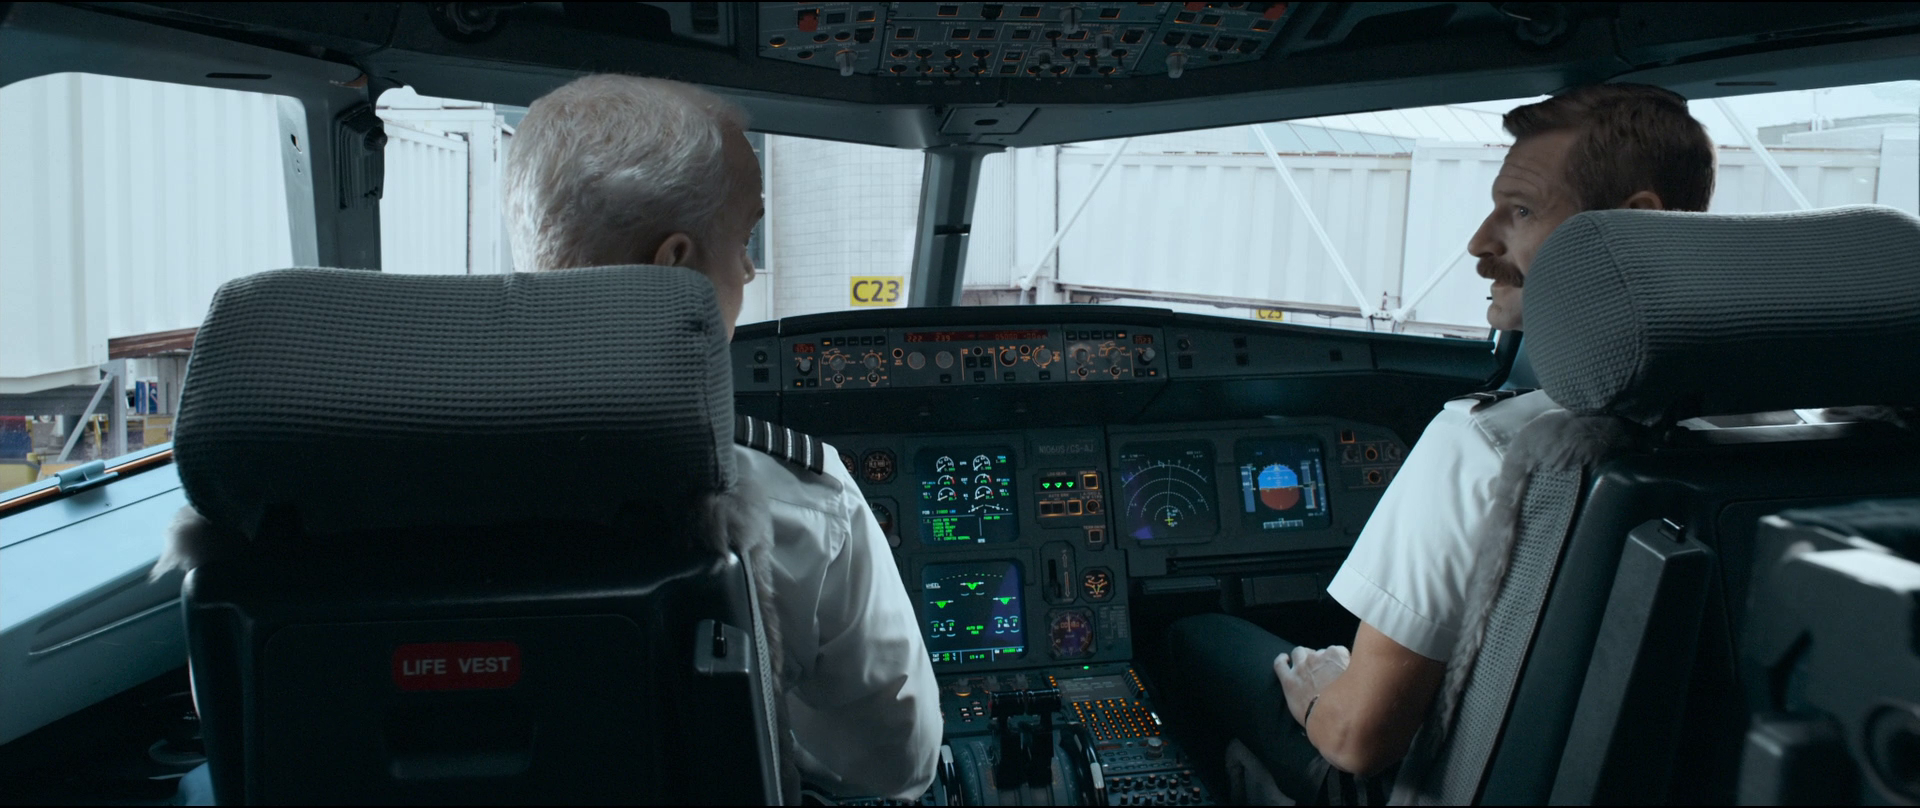 /ѷ漣 Sully.2016.1080p.BluRay.x264.DTS-HD.MA.7.1-FGT 9.07GB-7.png